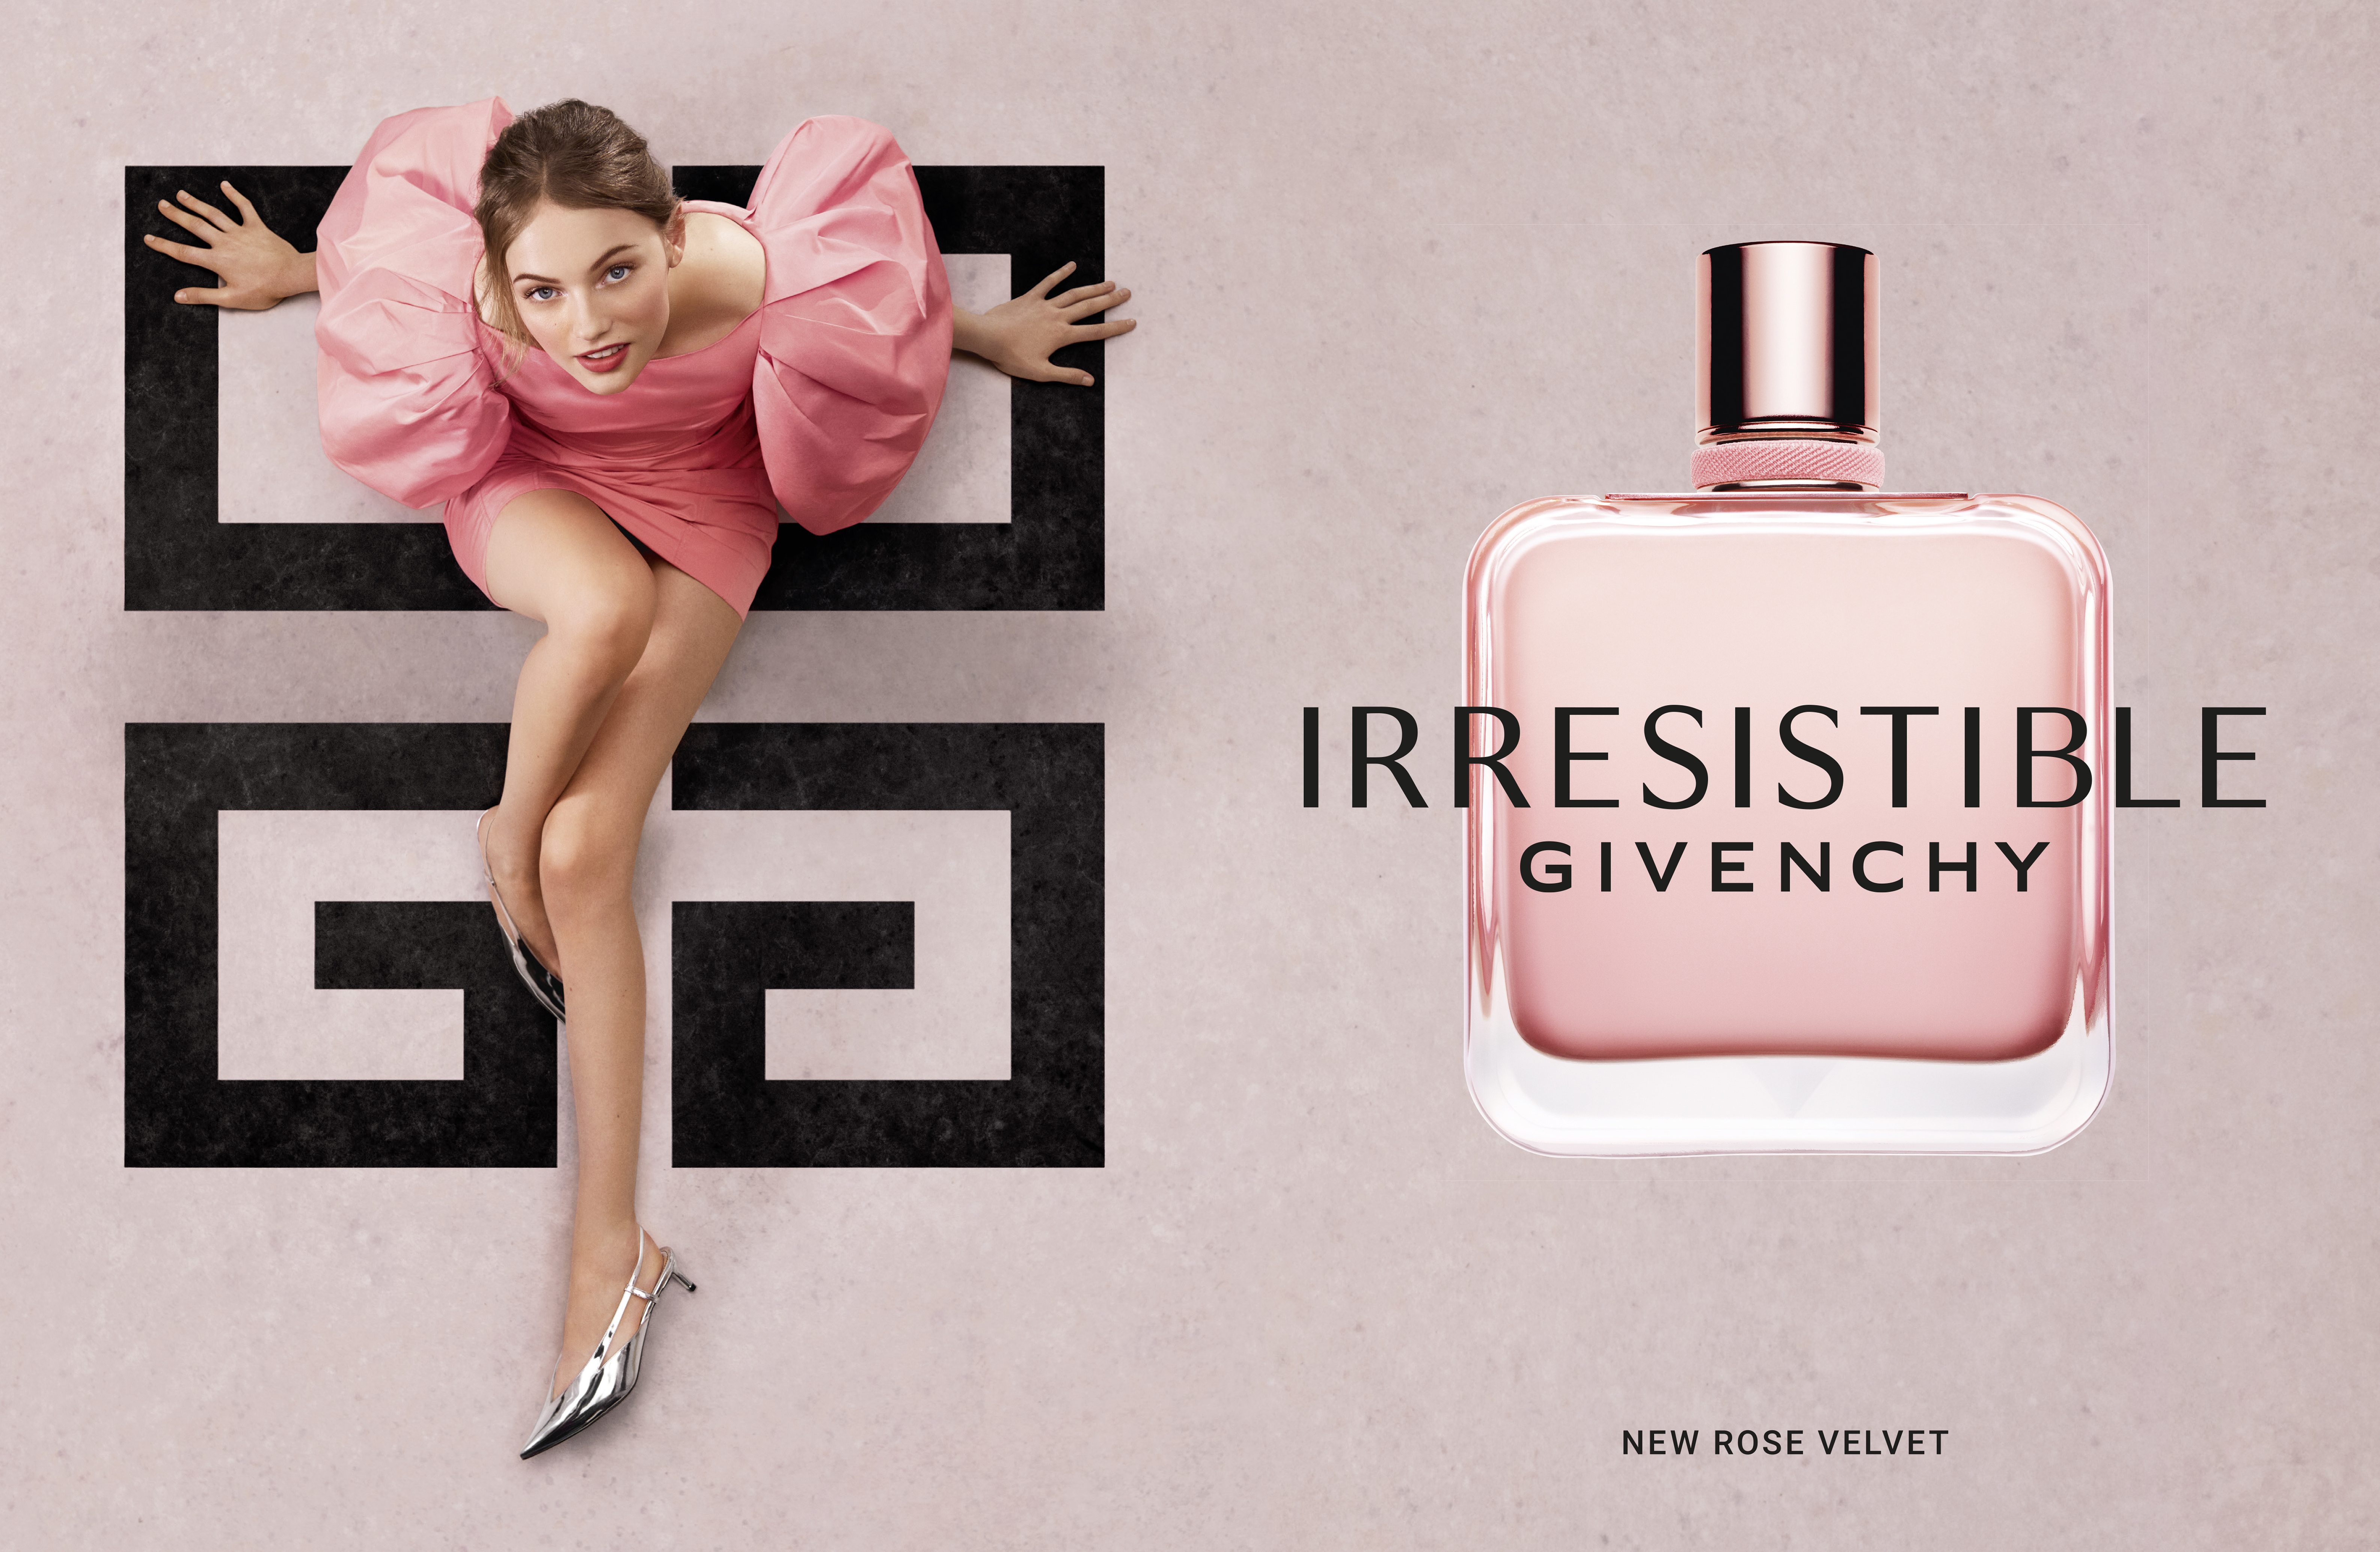 tap_dp_press_irresistible_edp_rose_velvet_inter_2023_a4_screen_rgb_with_layout_152214